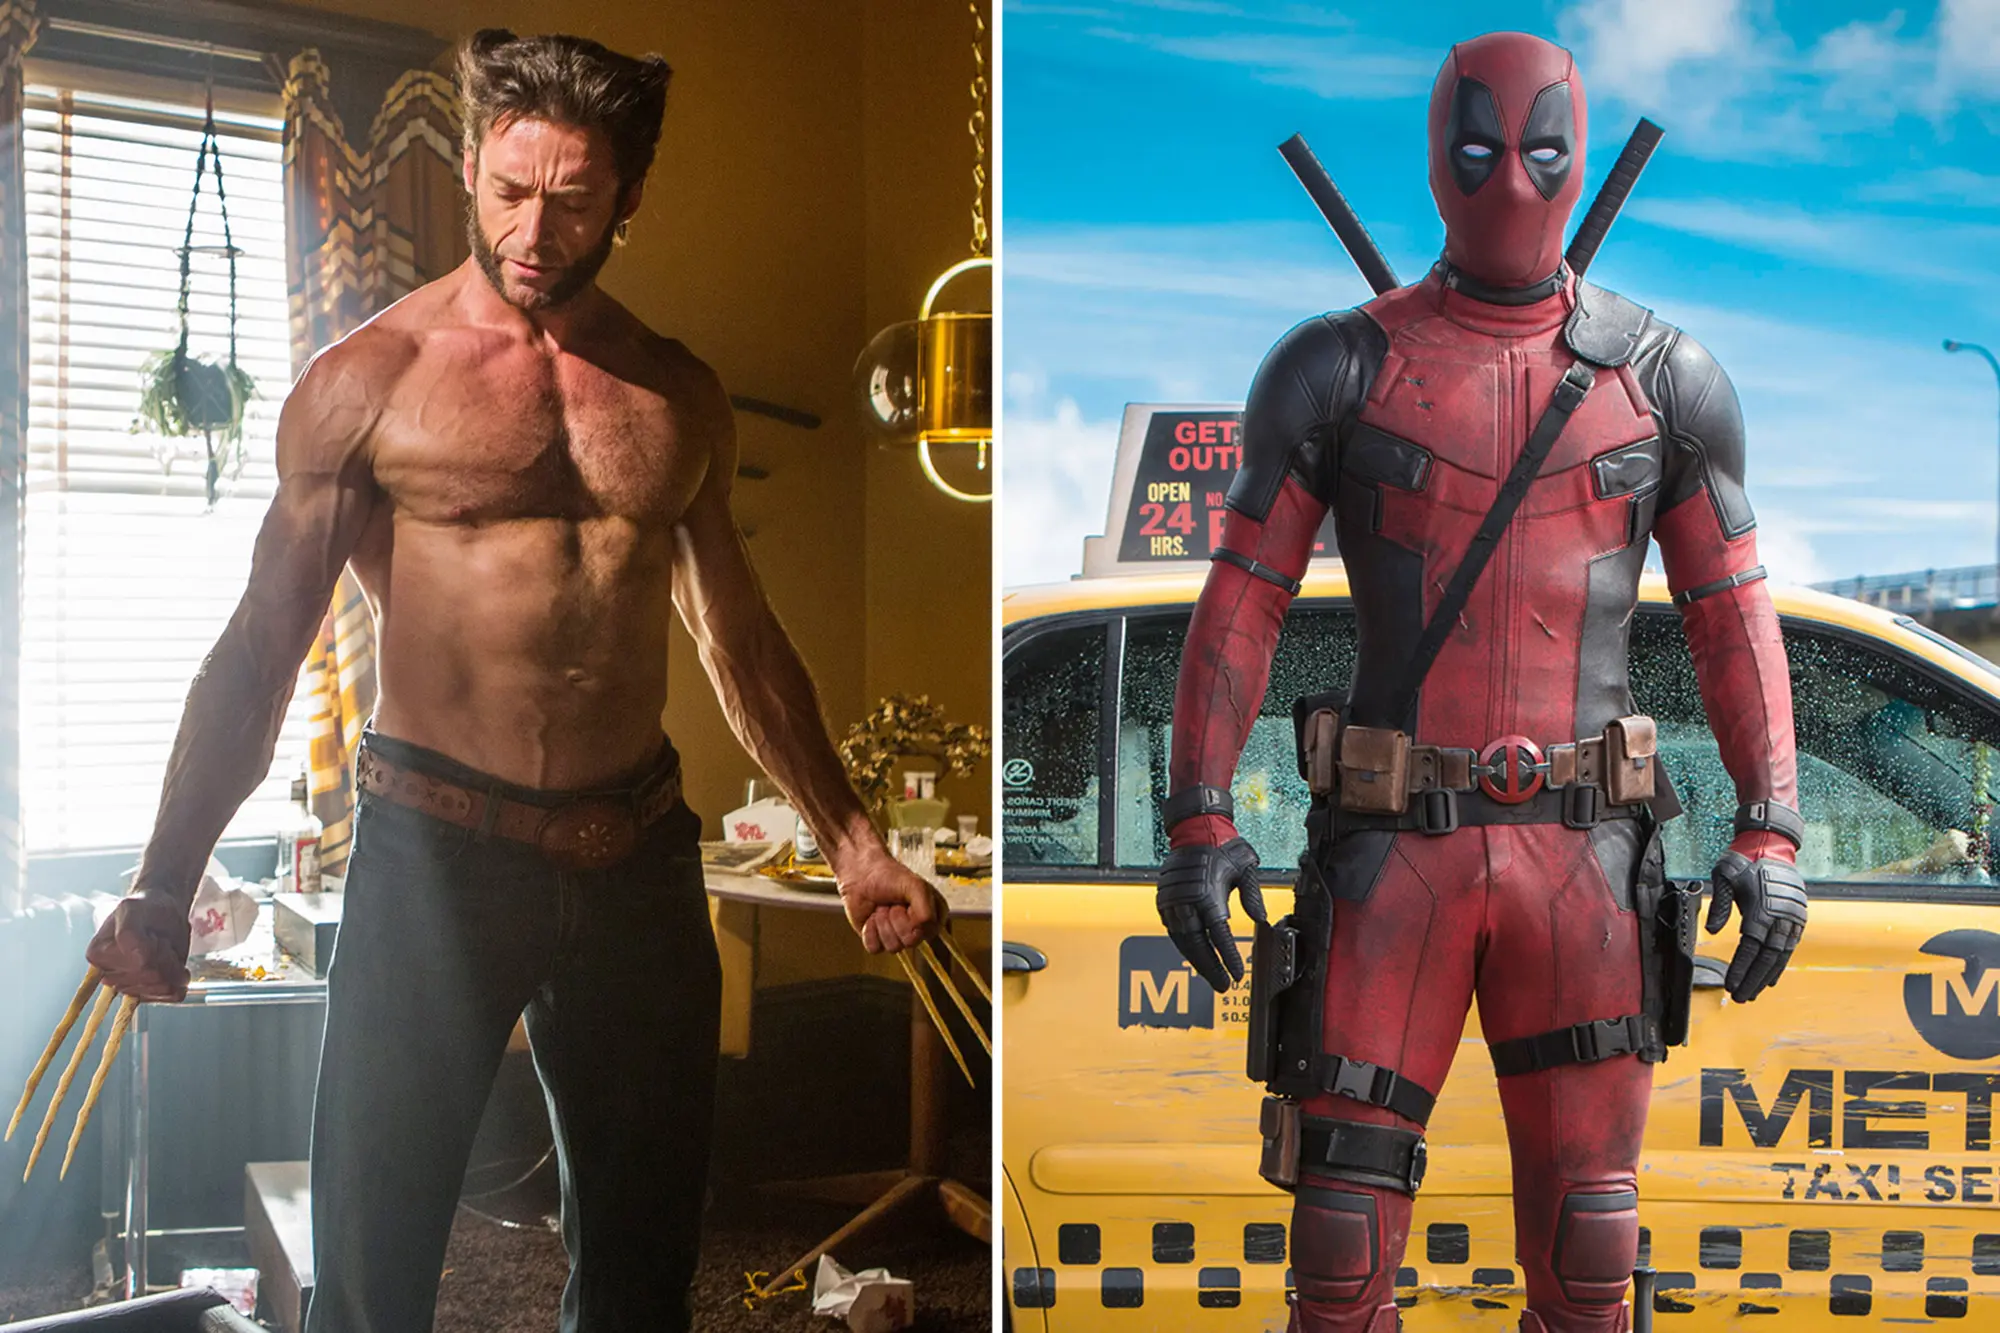 Exciting Peek into Deadpool 3 Marvel's Latest Epic with Reynolds and Jackman Sets New Superhero Standards-